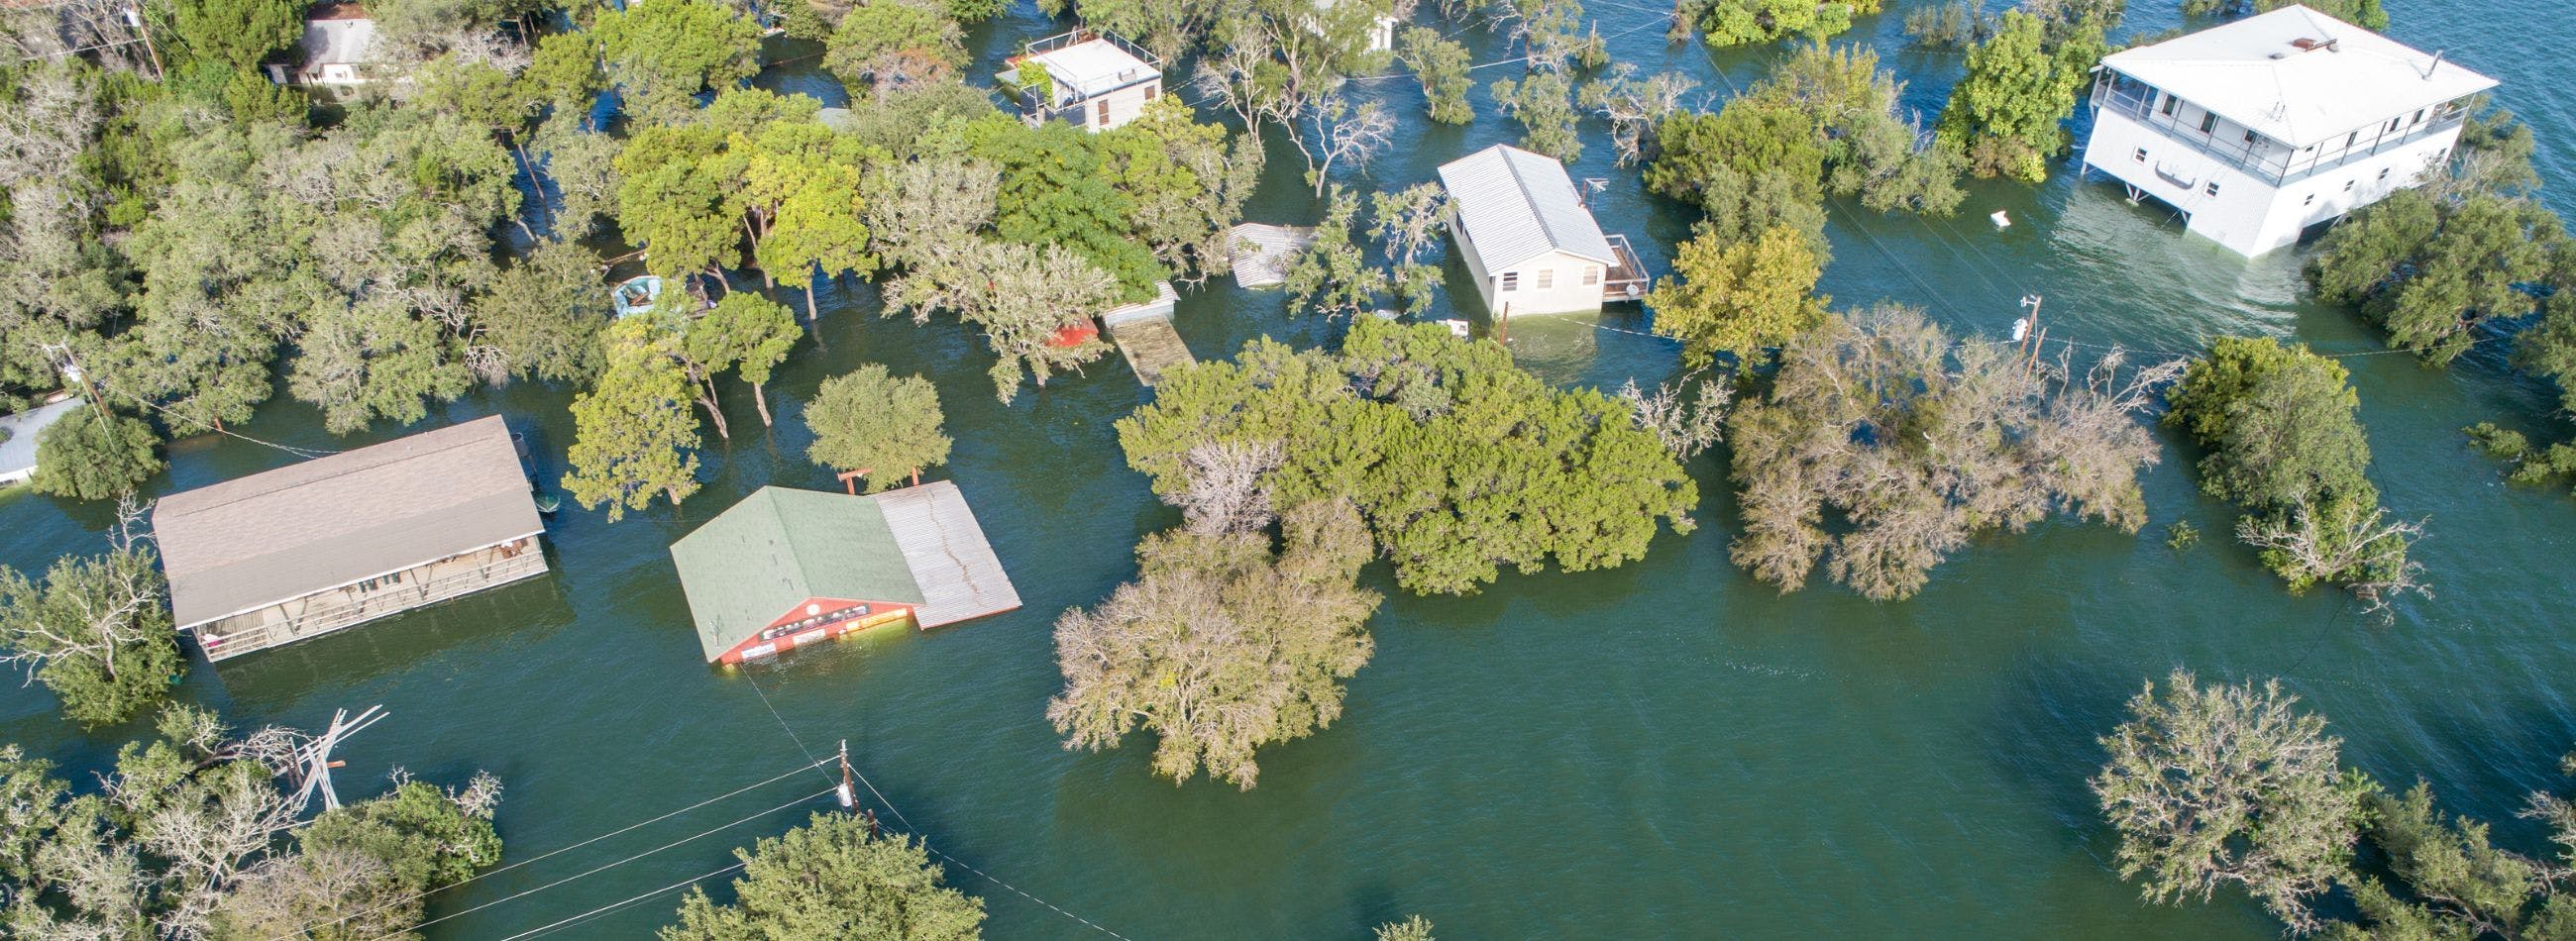 Florida homes in flood water